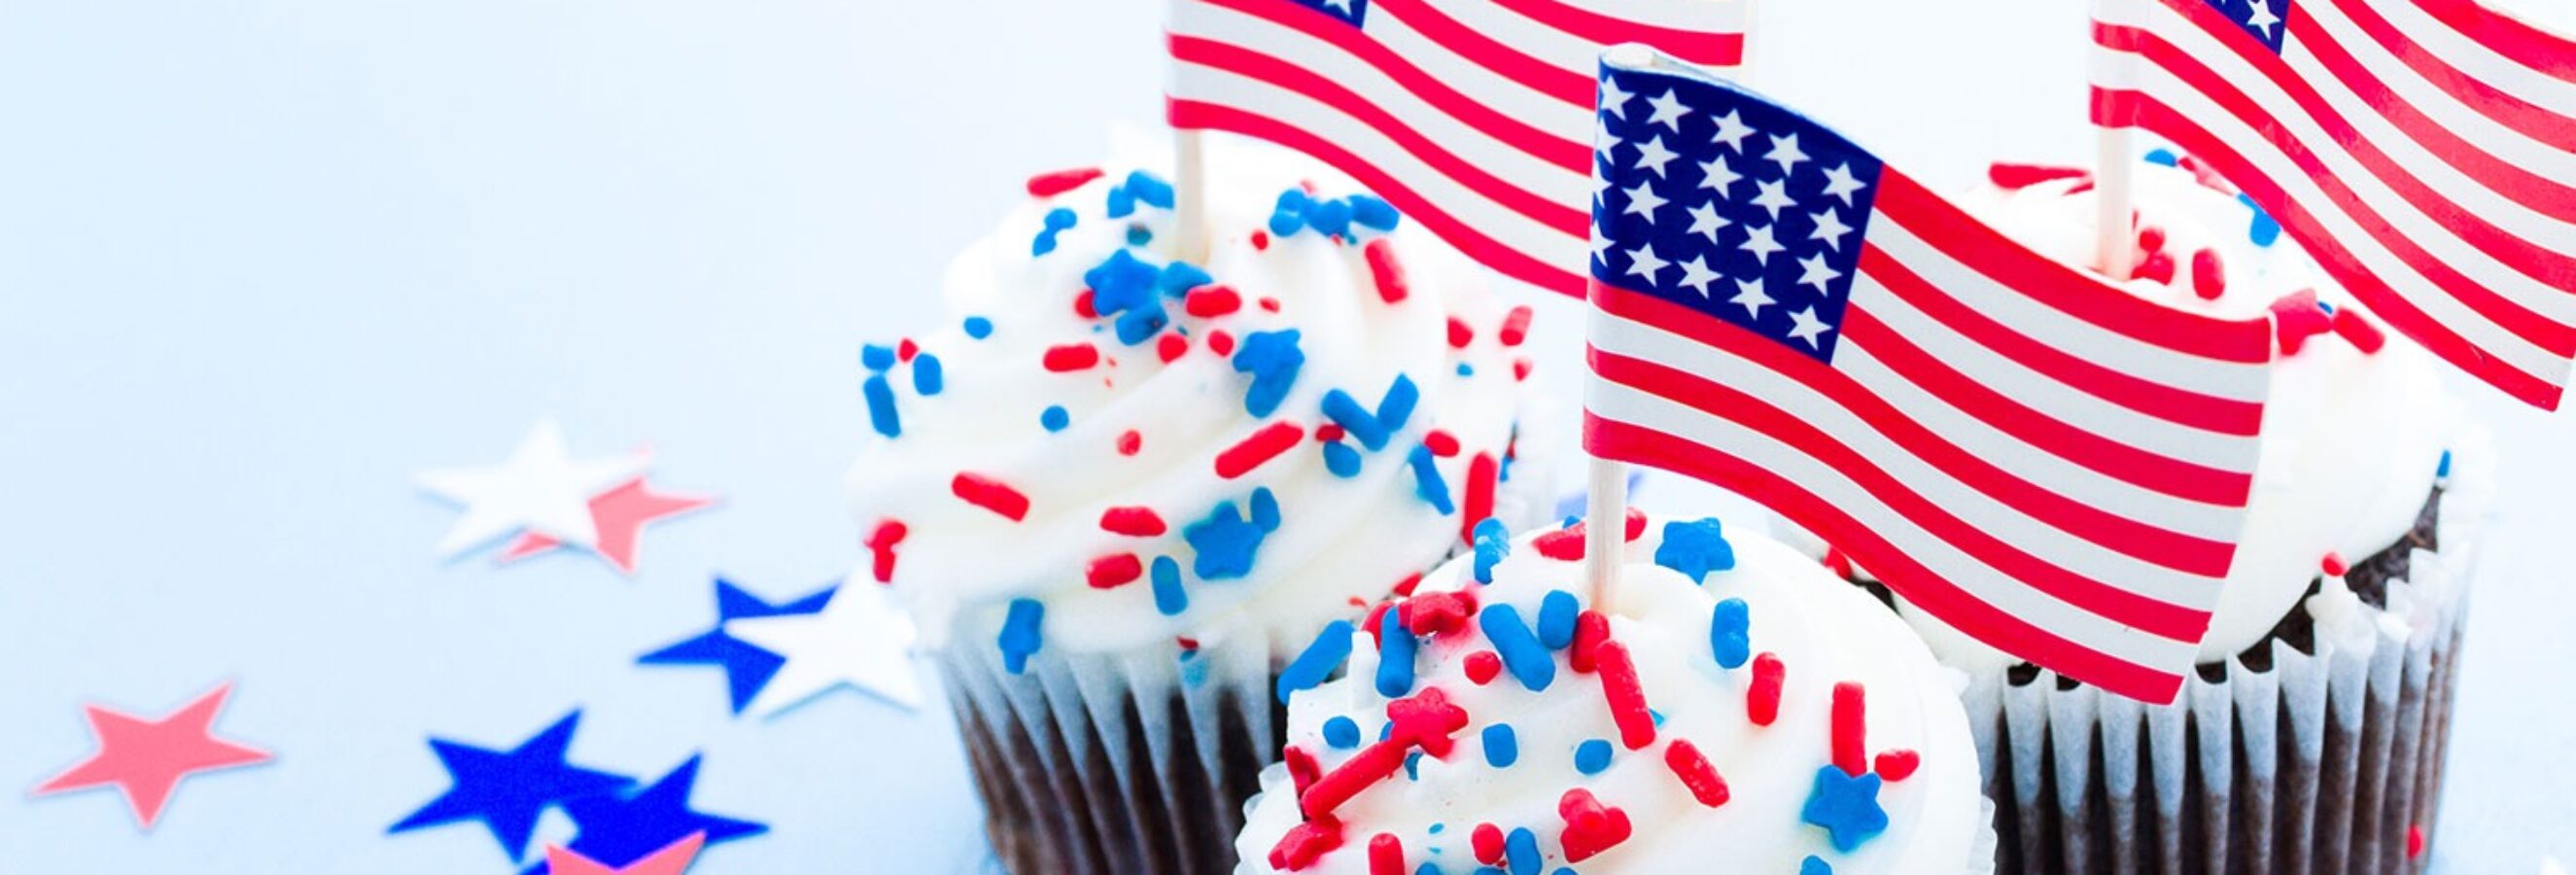 3 Shopper Marketing Tips for Independence Day Success